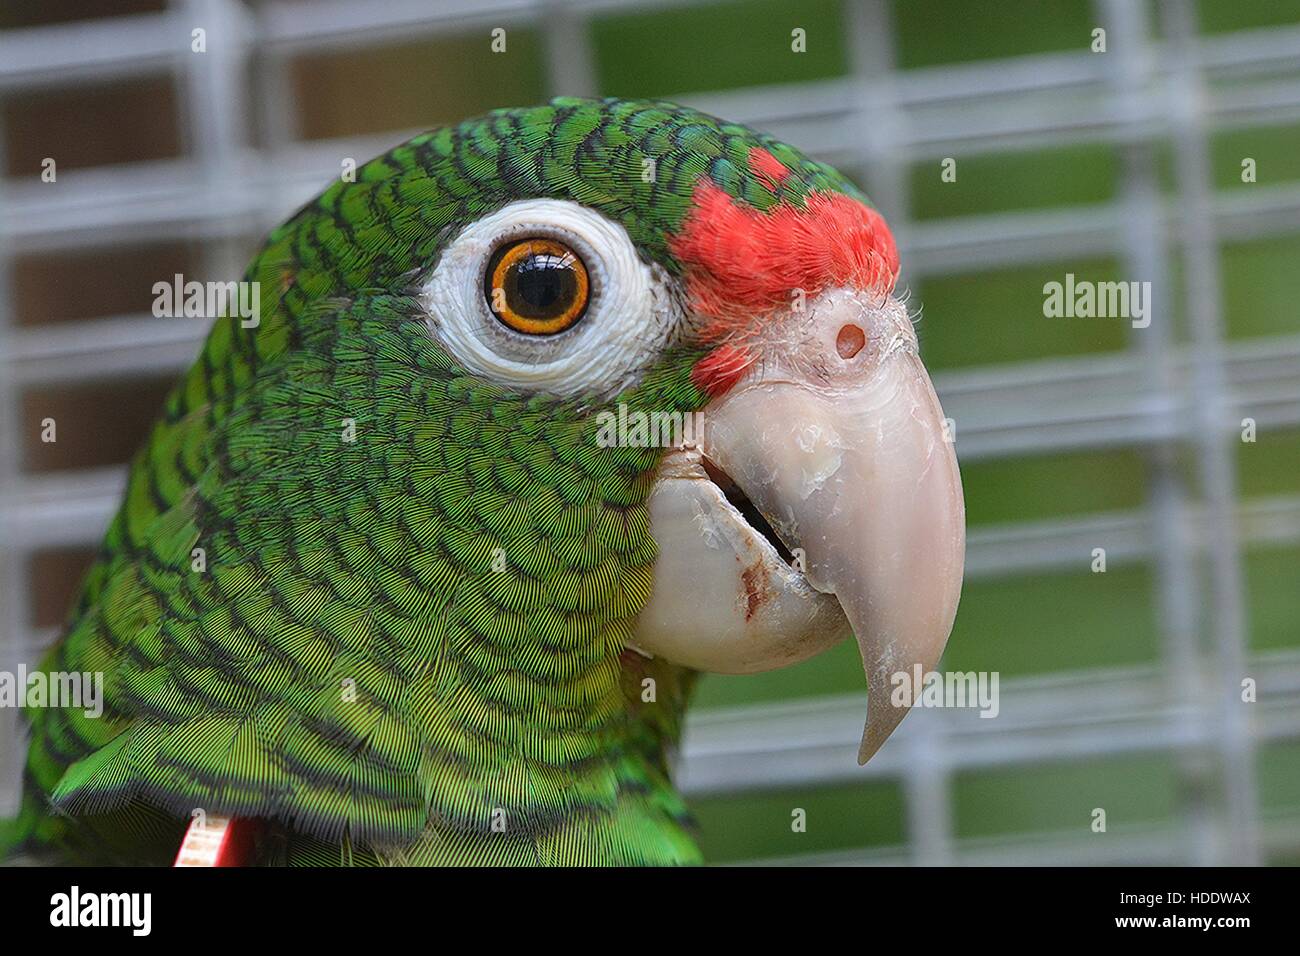 Close-up of a Puerto Rican Amazon parrot in a cage prior to release at the Maricao State Forest November 23, 2016 in Maricao, Puerto Rico. Stock Photo